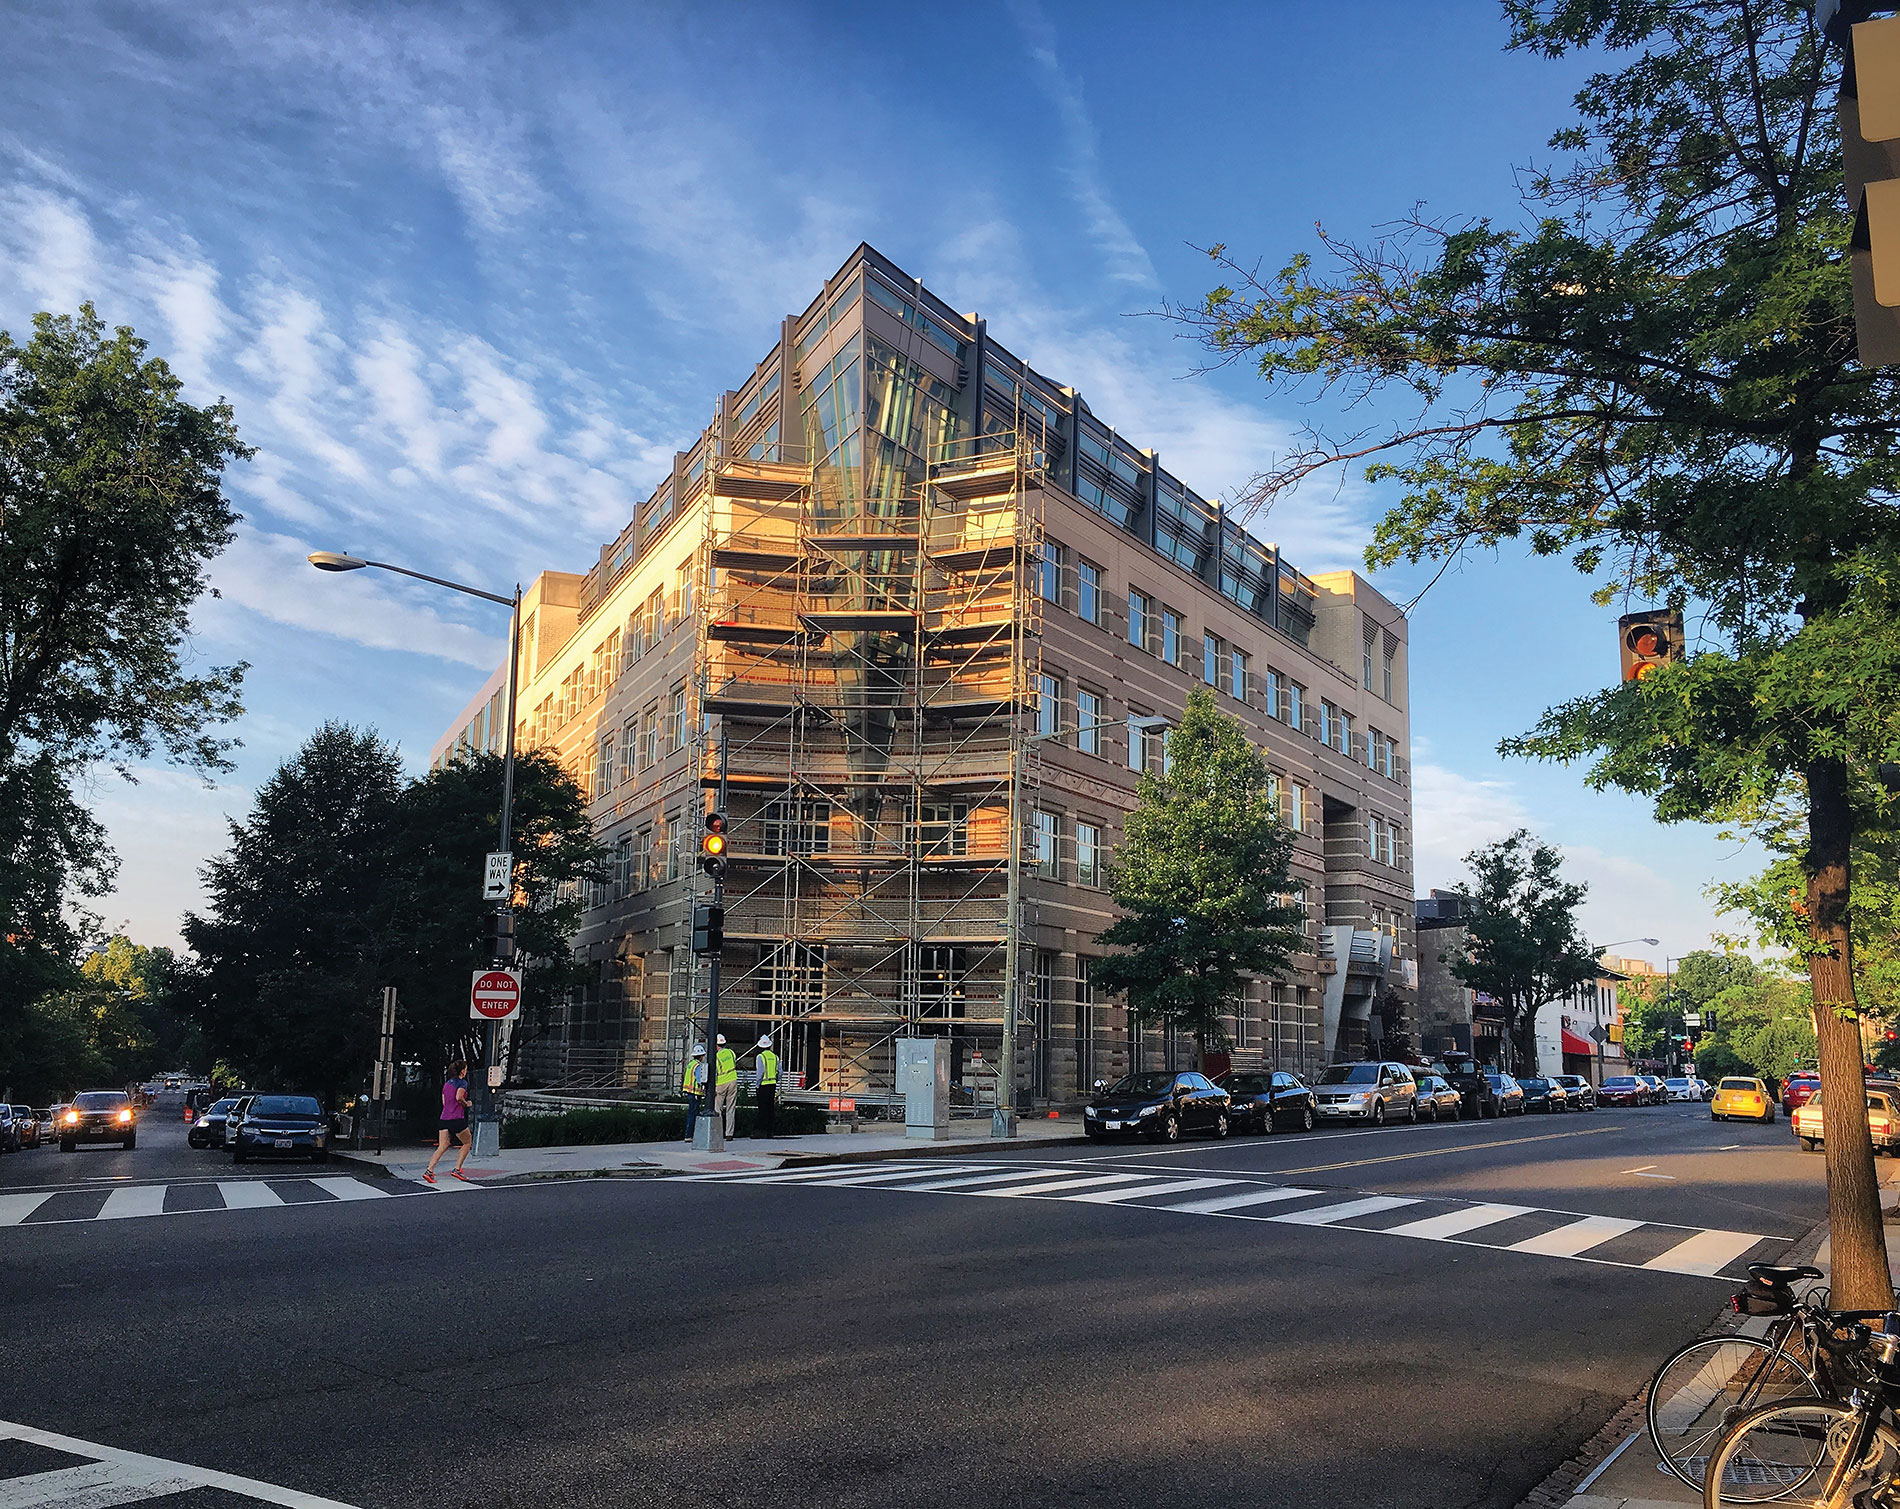 The American Geophysical Union building on a street corner, with some scaffolding. Image by Caitlyn Camacho for AGU.